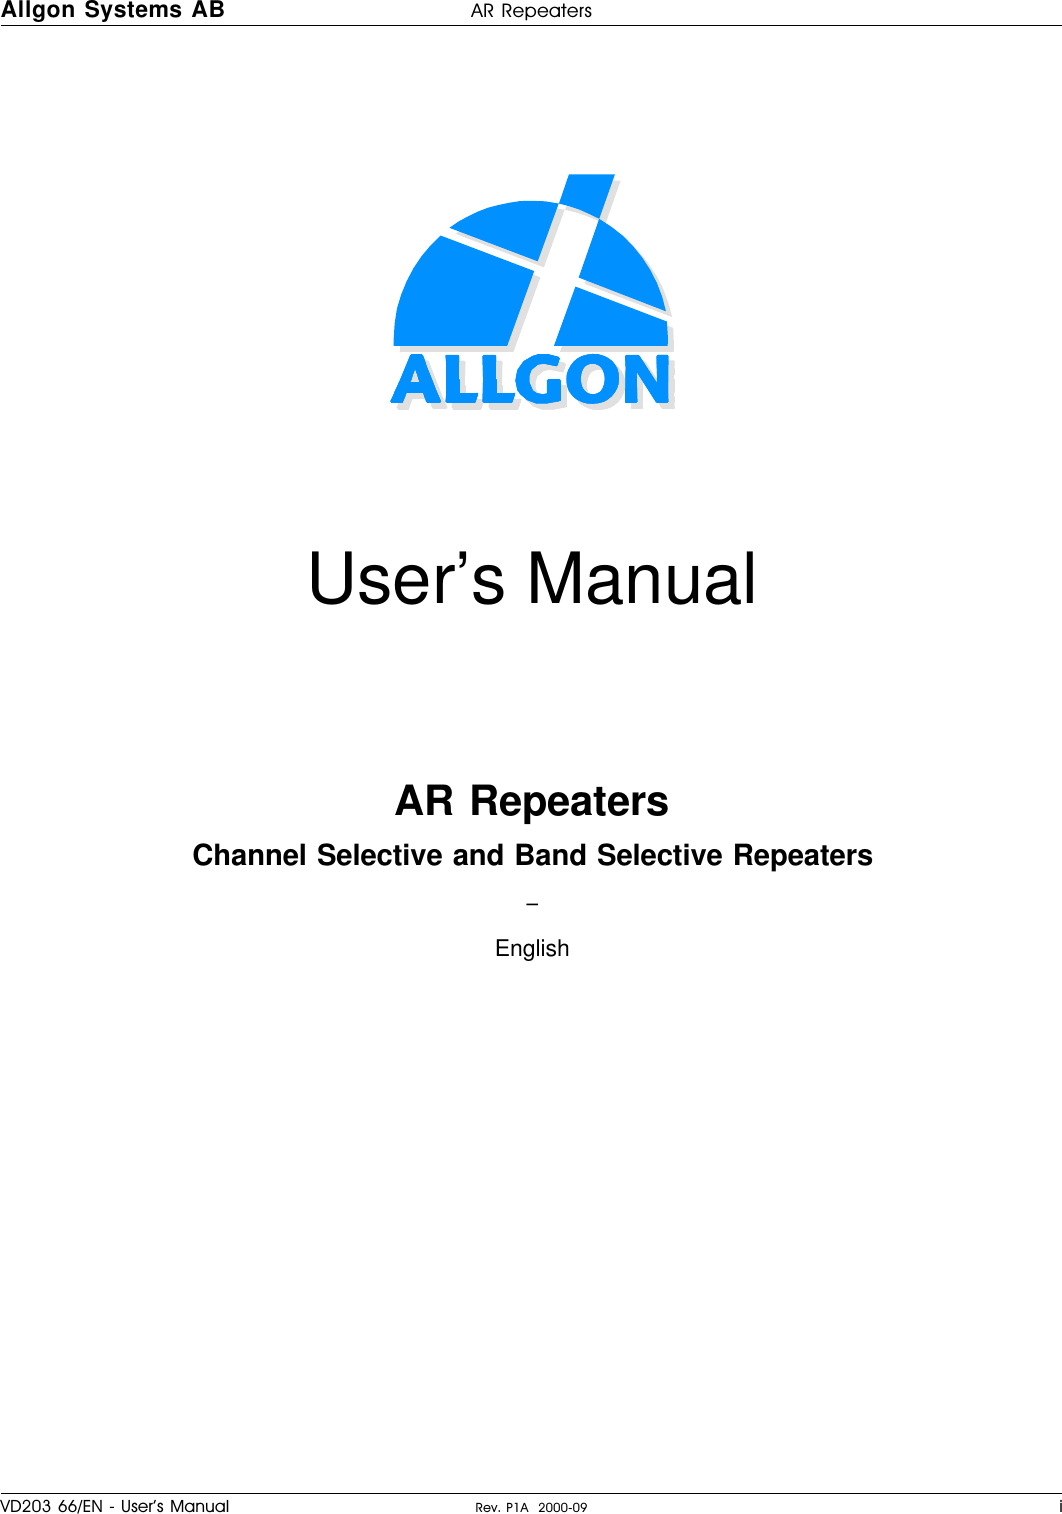 User’s ManualAR RepeatersChannel Selective and Band Selective Repeaters–EnglishAllgon Systems AB AR RepeatersVD203 66/EN - User’s Manual Rev. P1A  2000-09 i